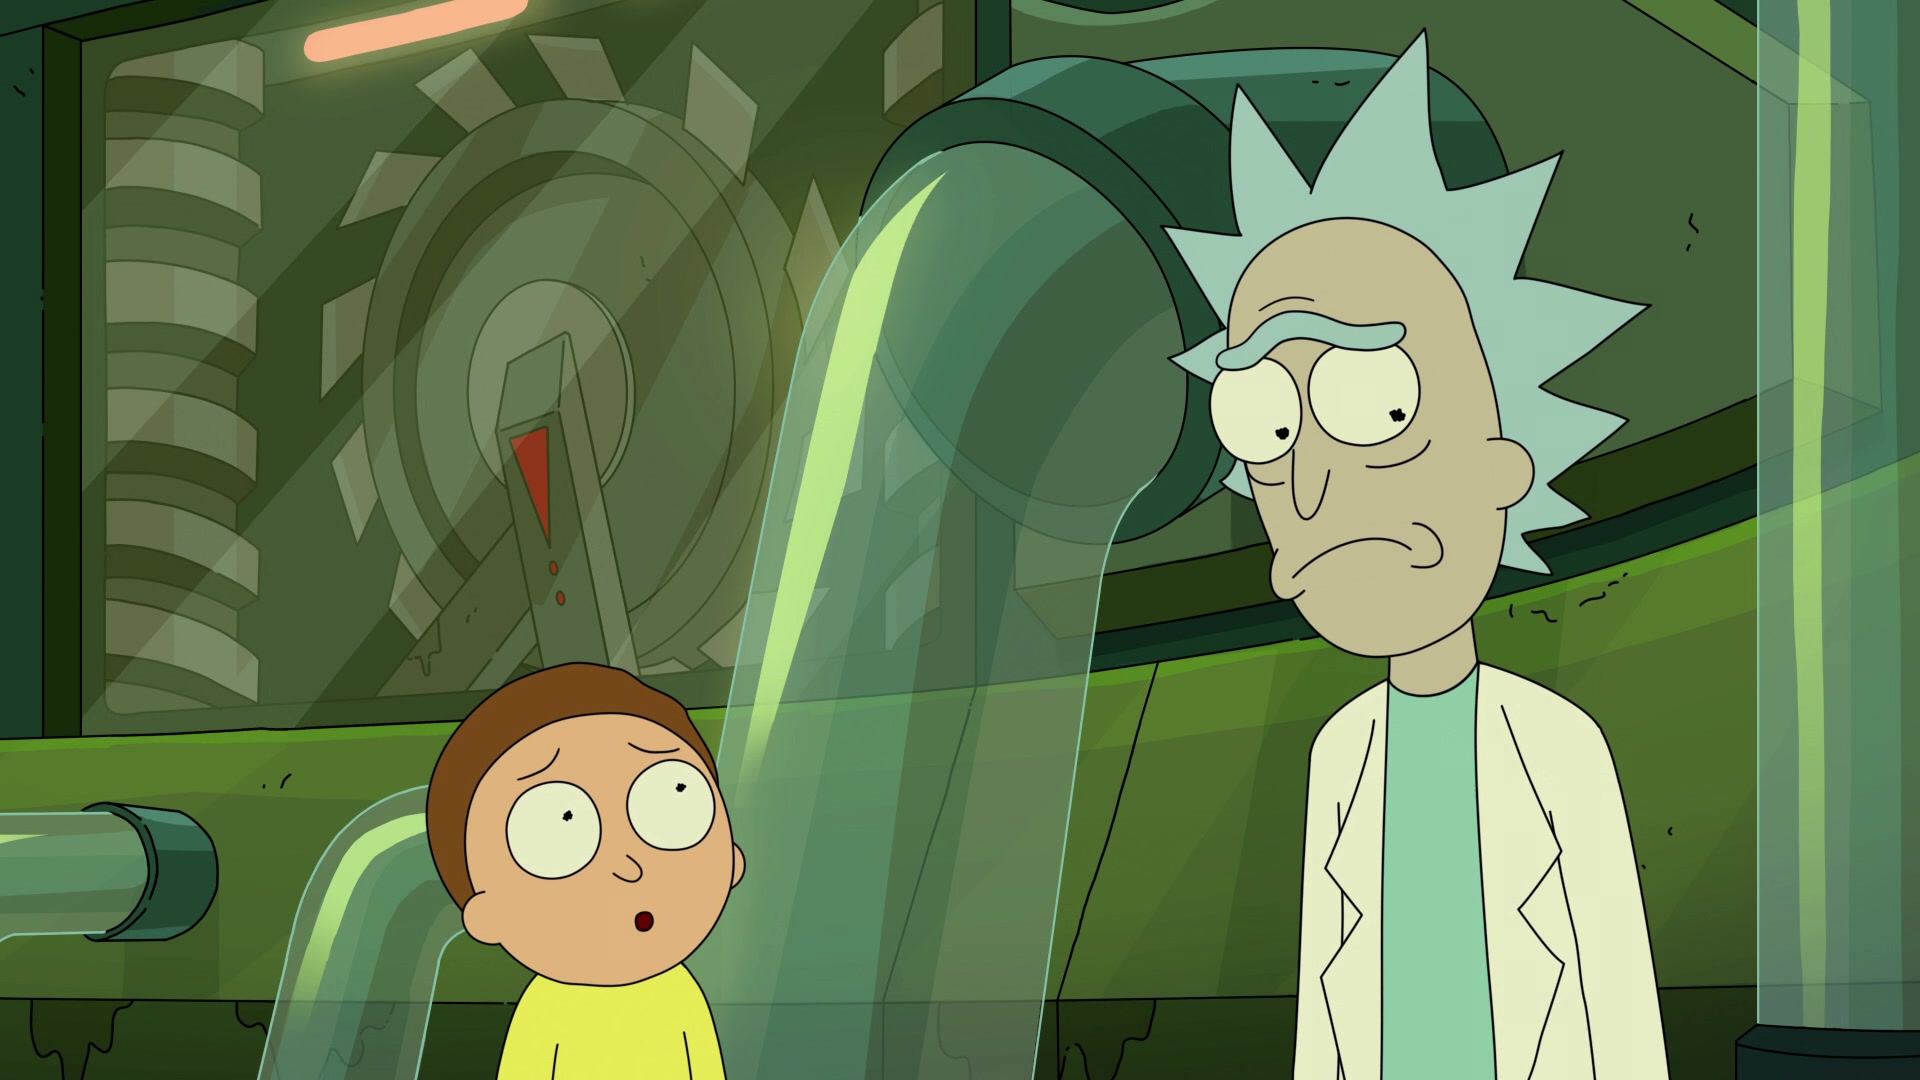 Morty (Justin Roiland) confronts Rick (Justin Roiland) about their rift in Rick (Justin Roiland) abandons Morty (Justin Roiland) for life as an anime hero in  Rick and Morty Season 5 Episode 10 "Rickmurai Jack" (2021), Adult Swim